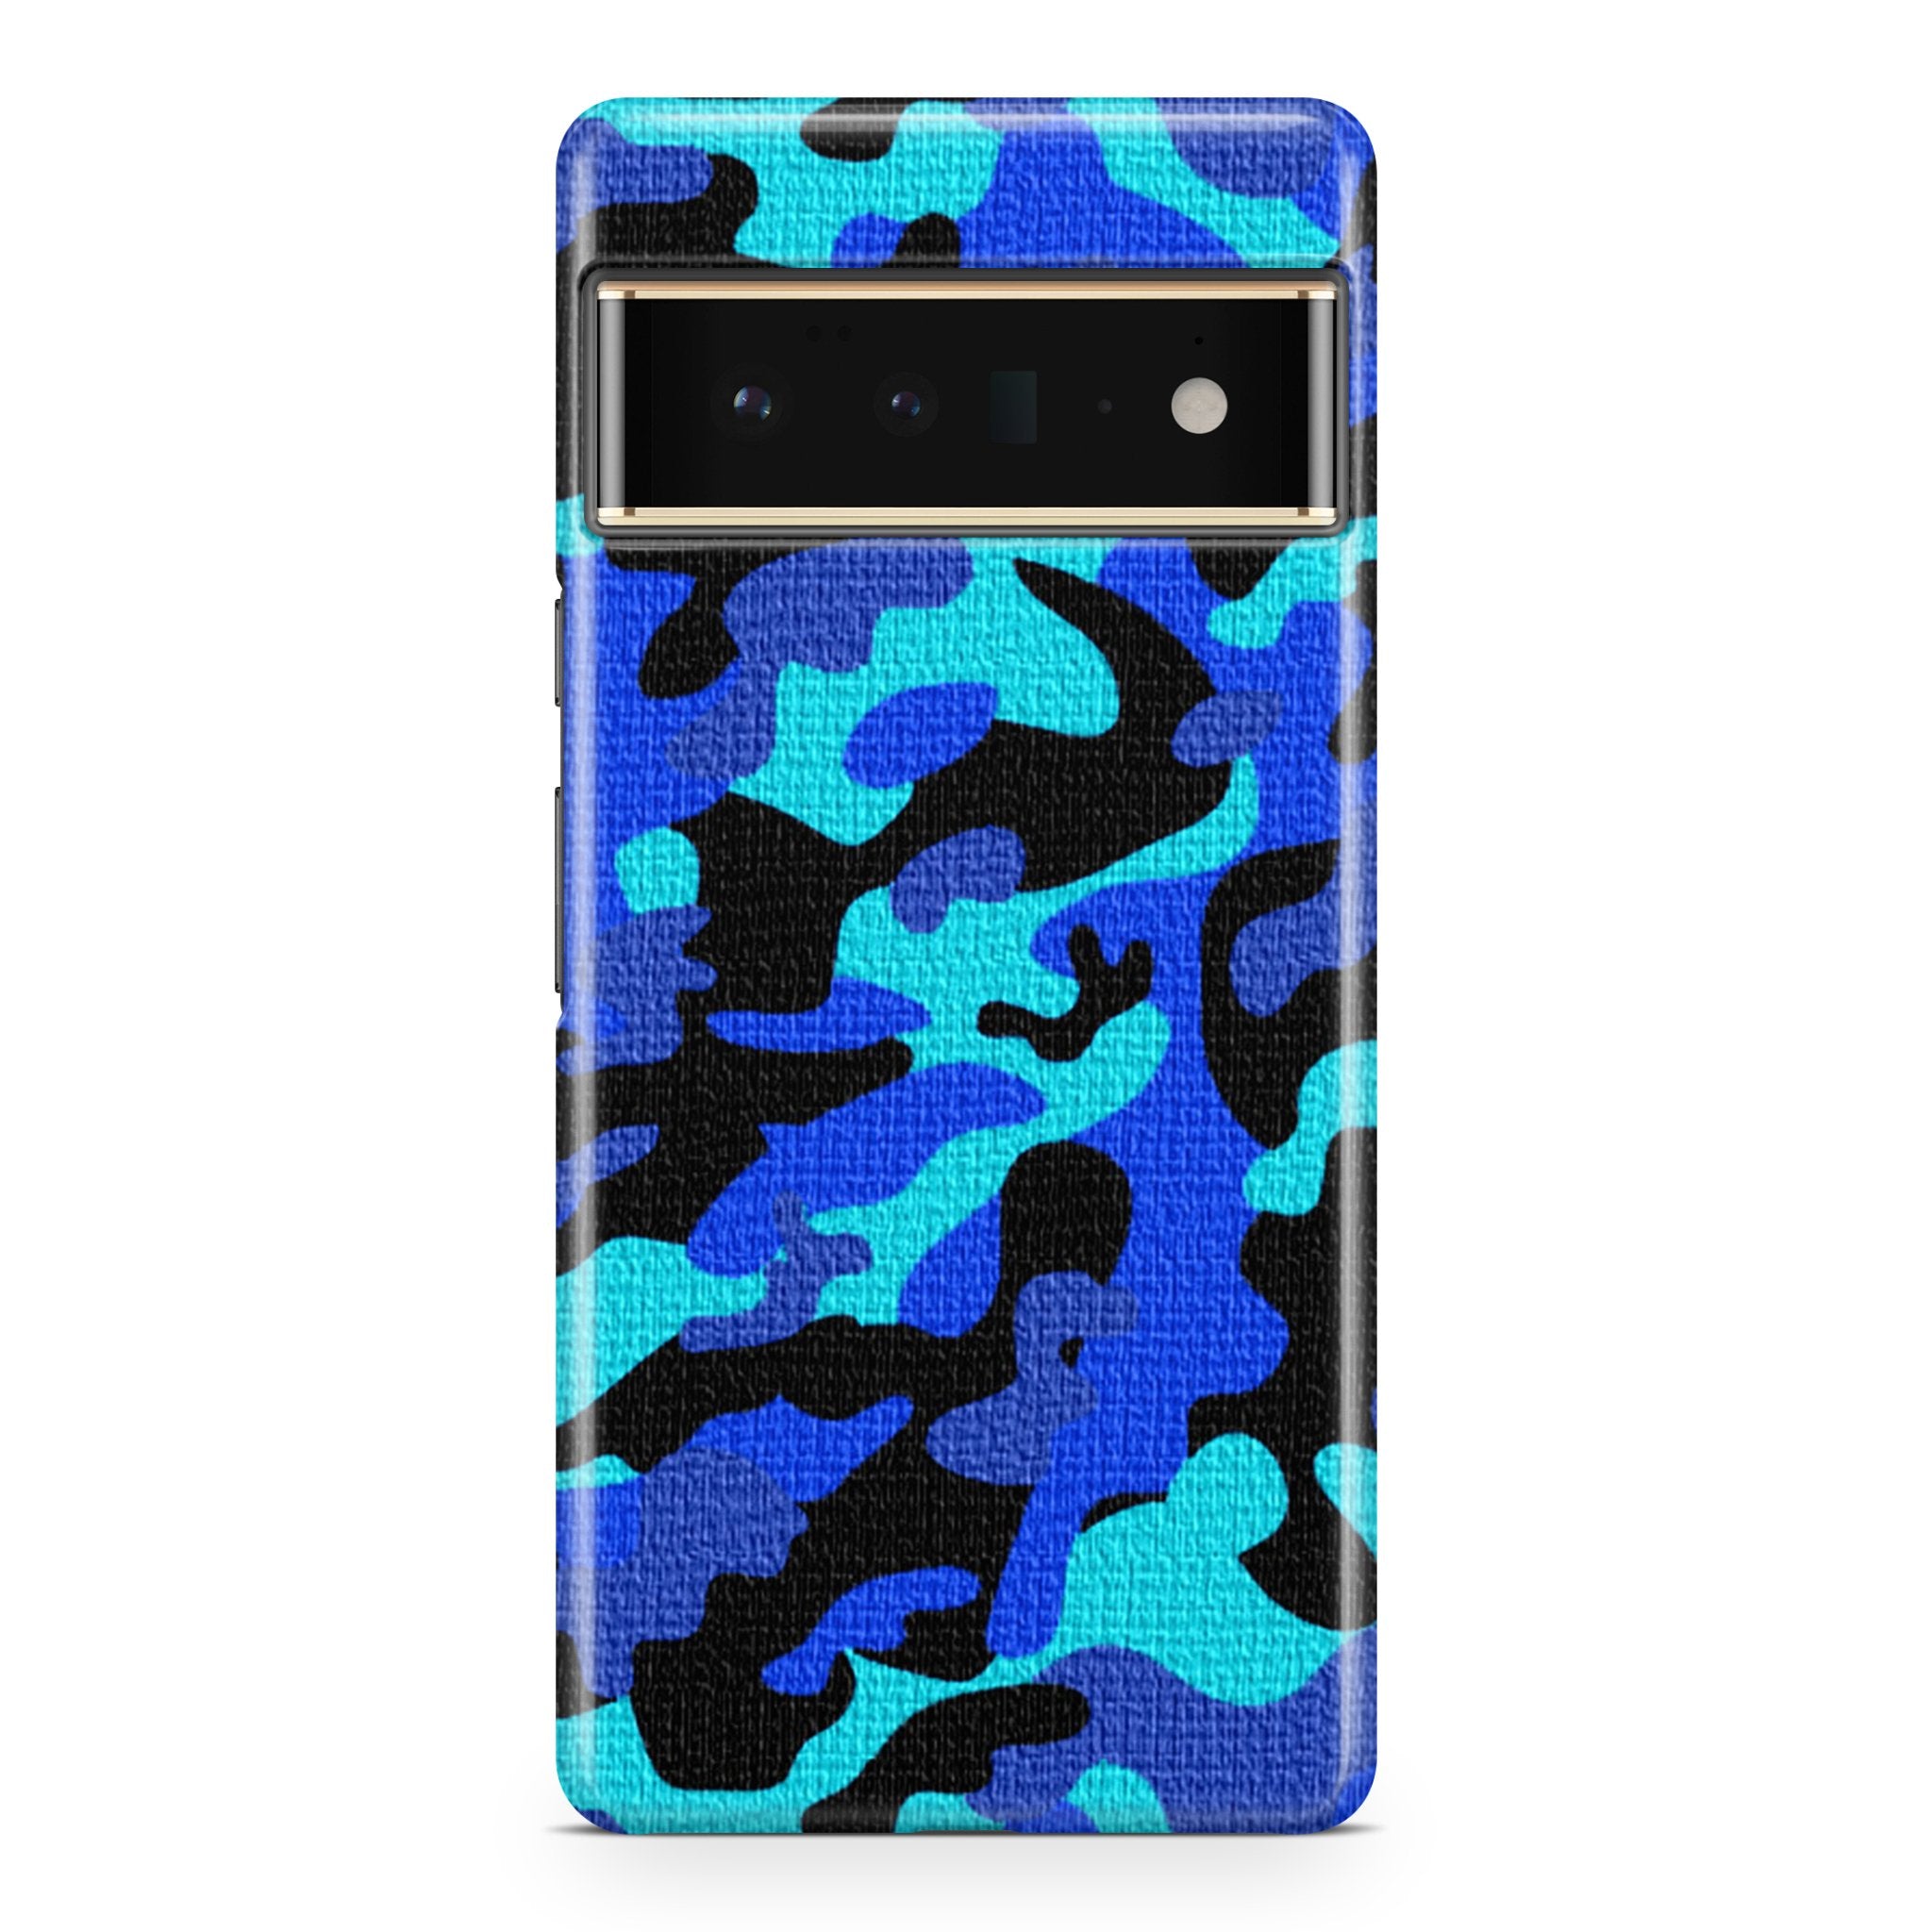 Blue Camo - Google phone case designs by CaseSwagger